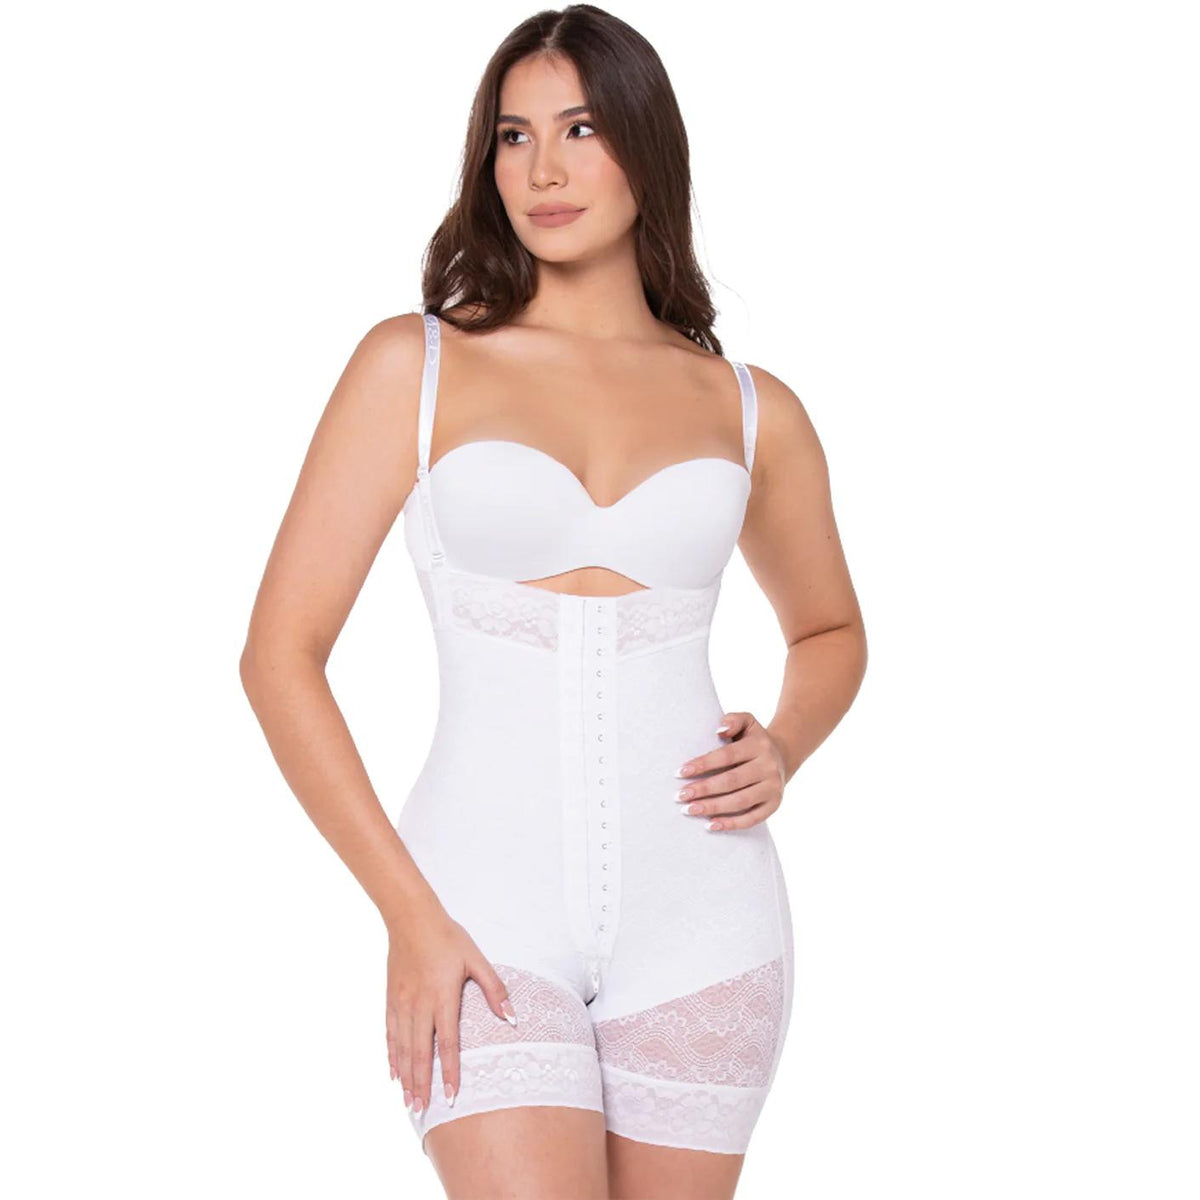 Hourglass girdle with adjustable straps and hooks, Colombian girdles